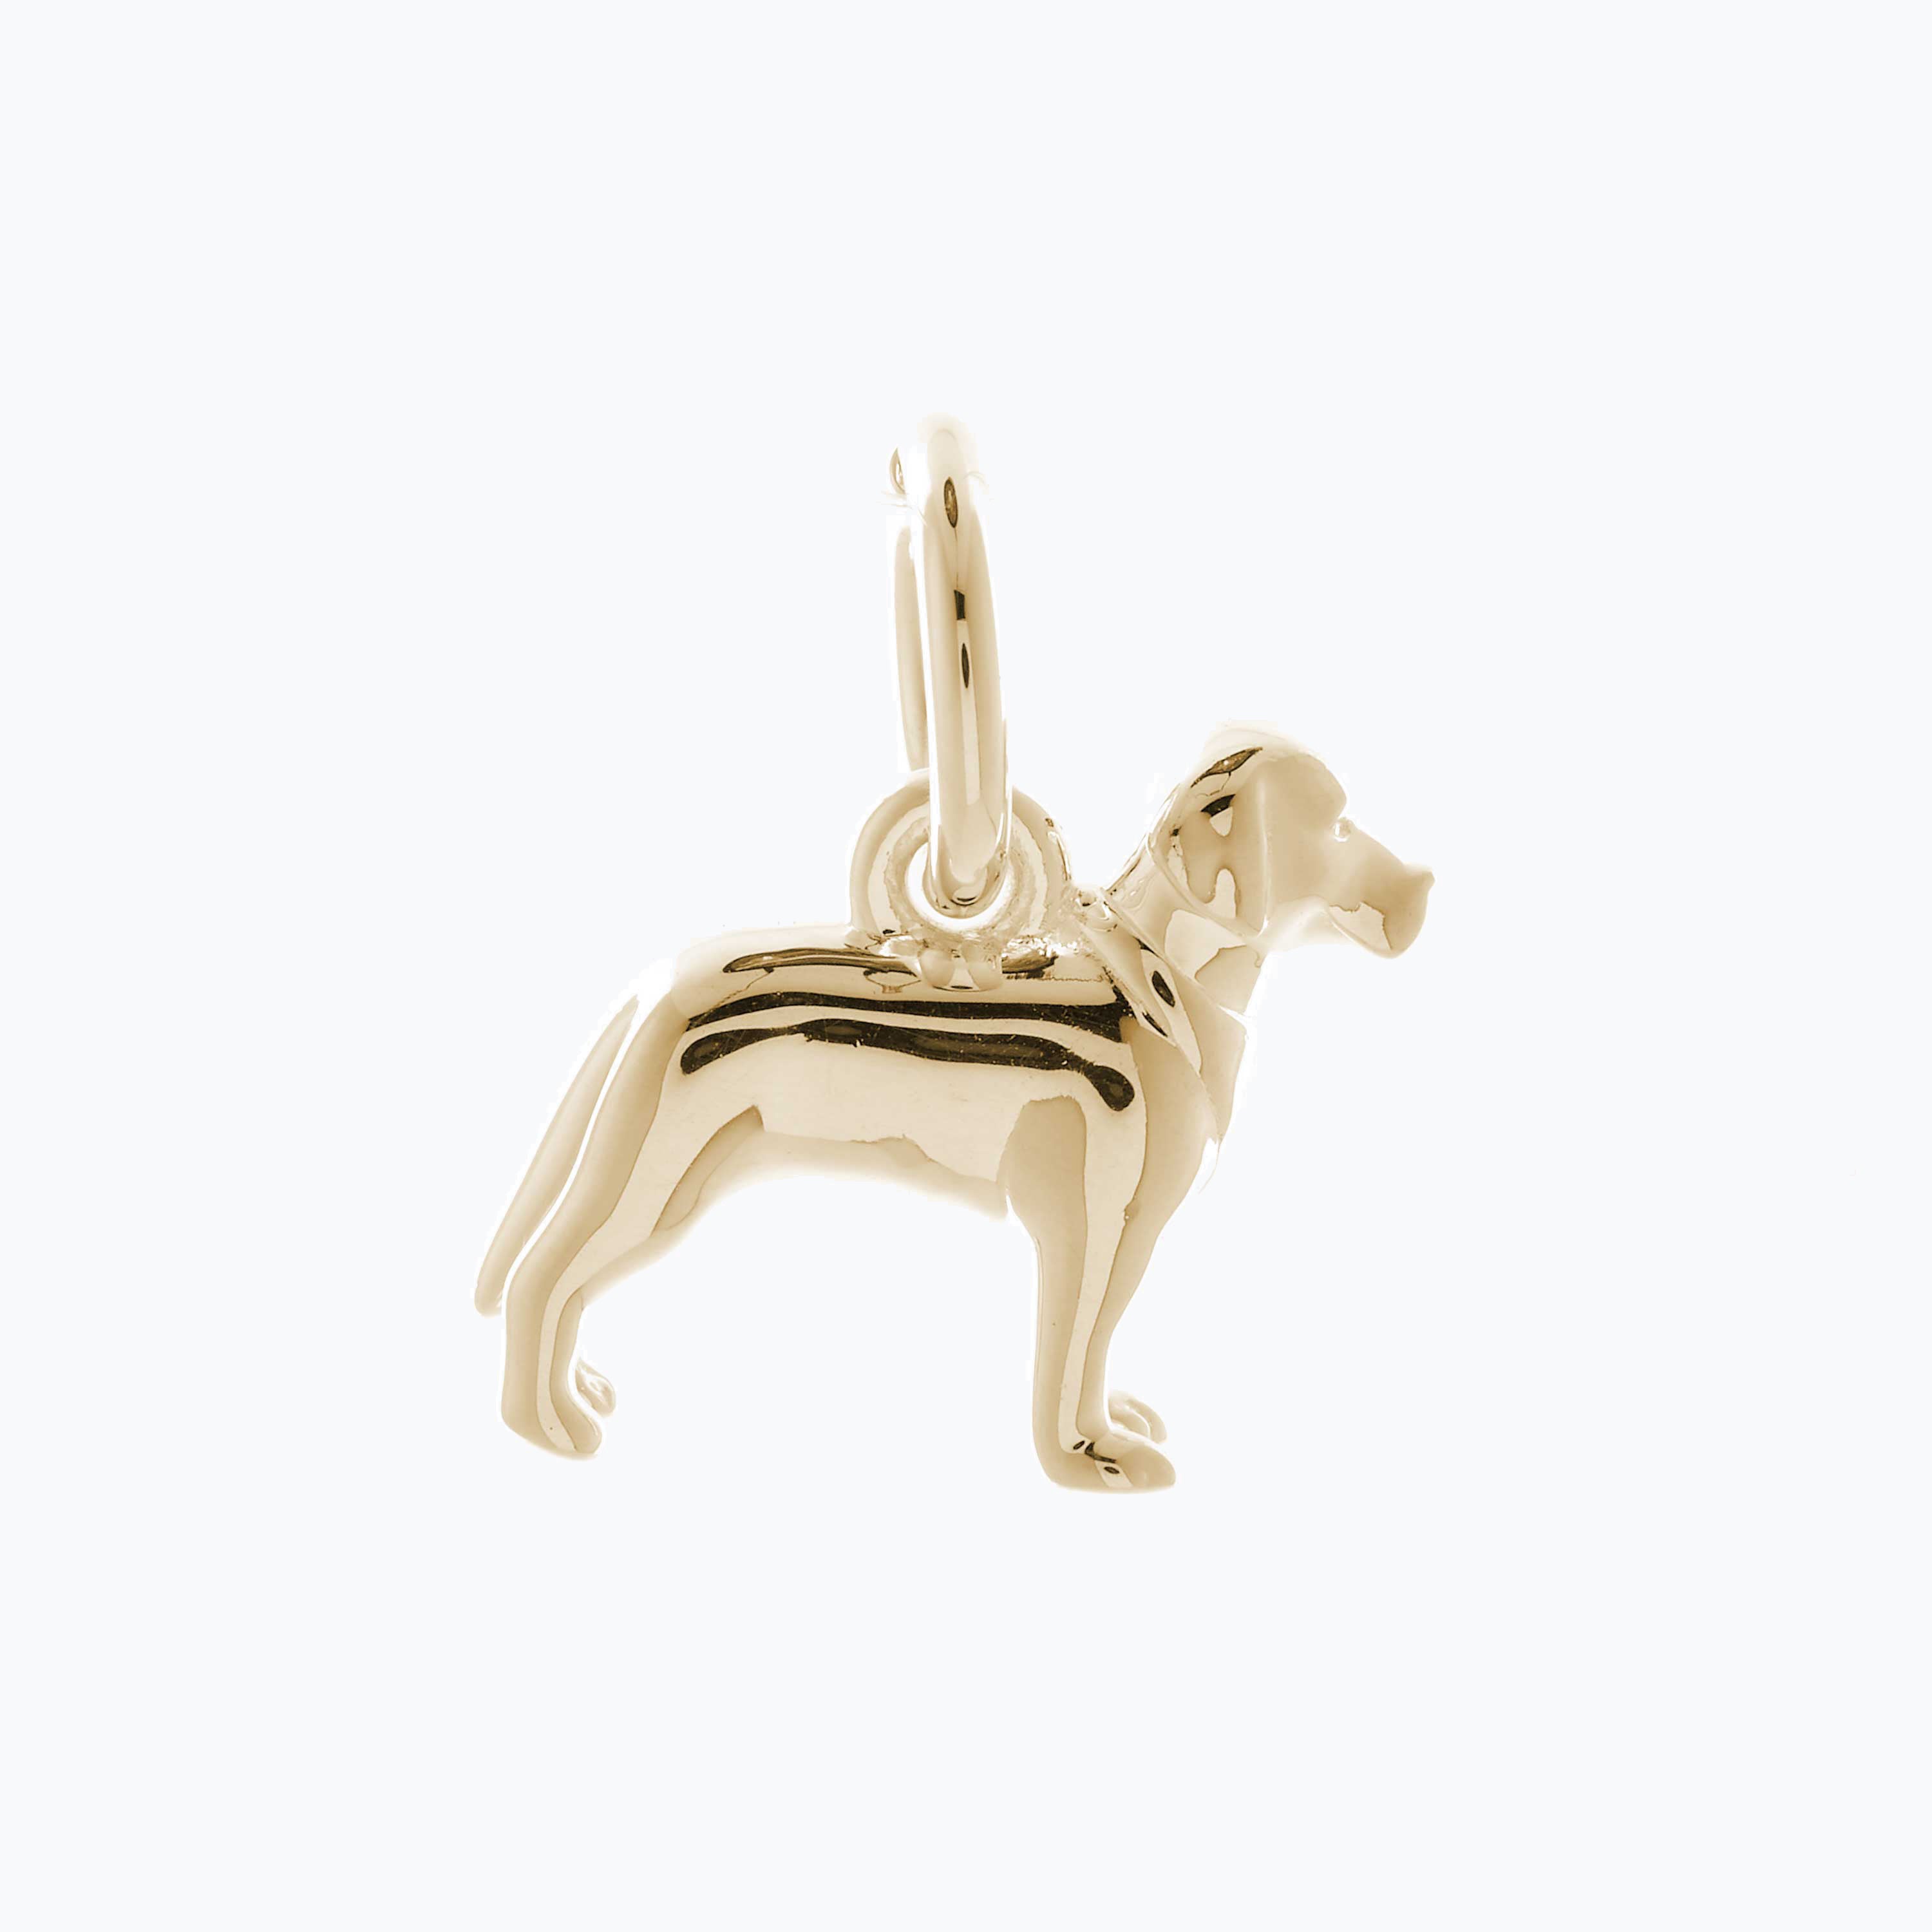 Solid 9ct gold Labrador charm with tiny bandana (optional), perfect for a charm bracelet or necklace.